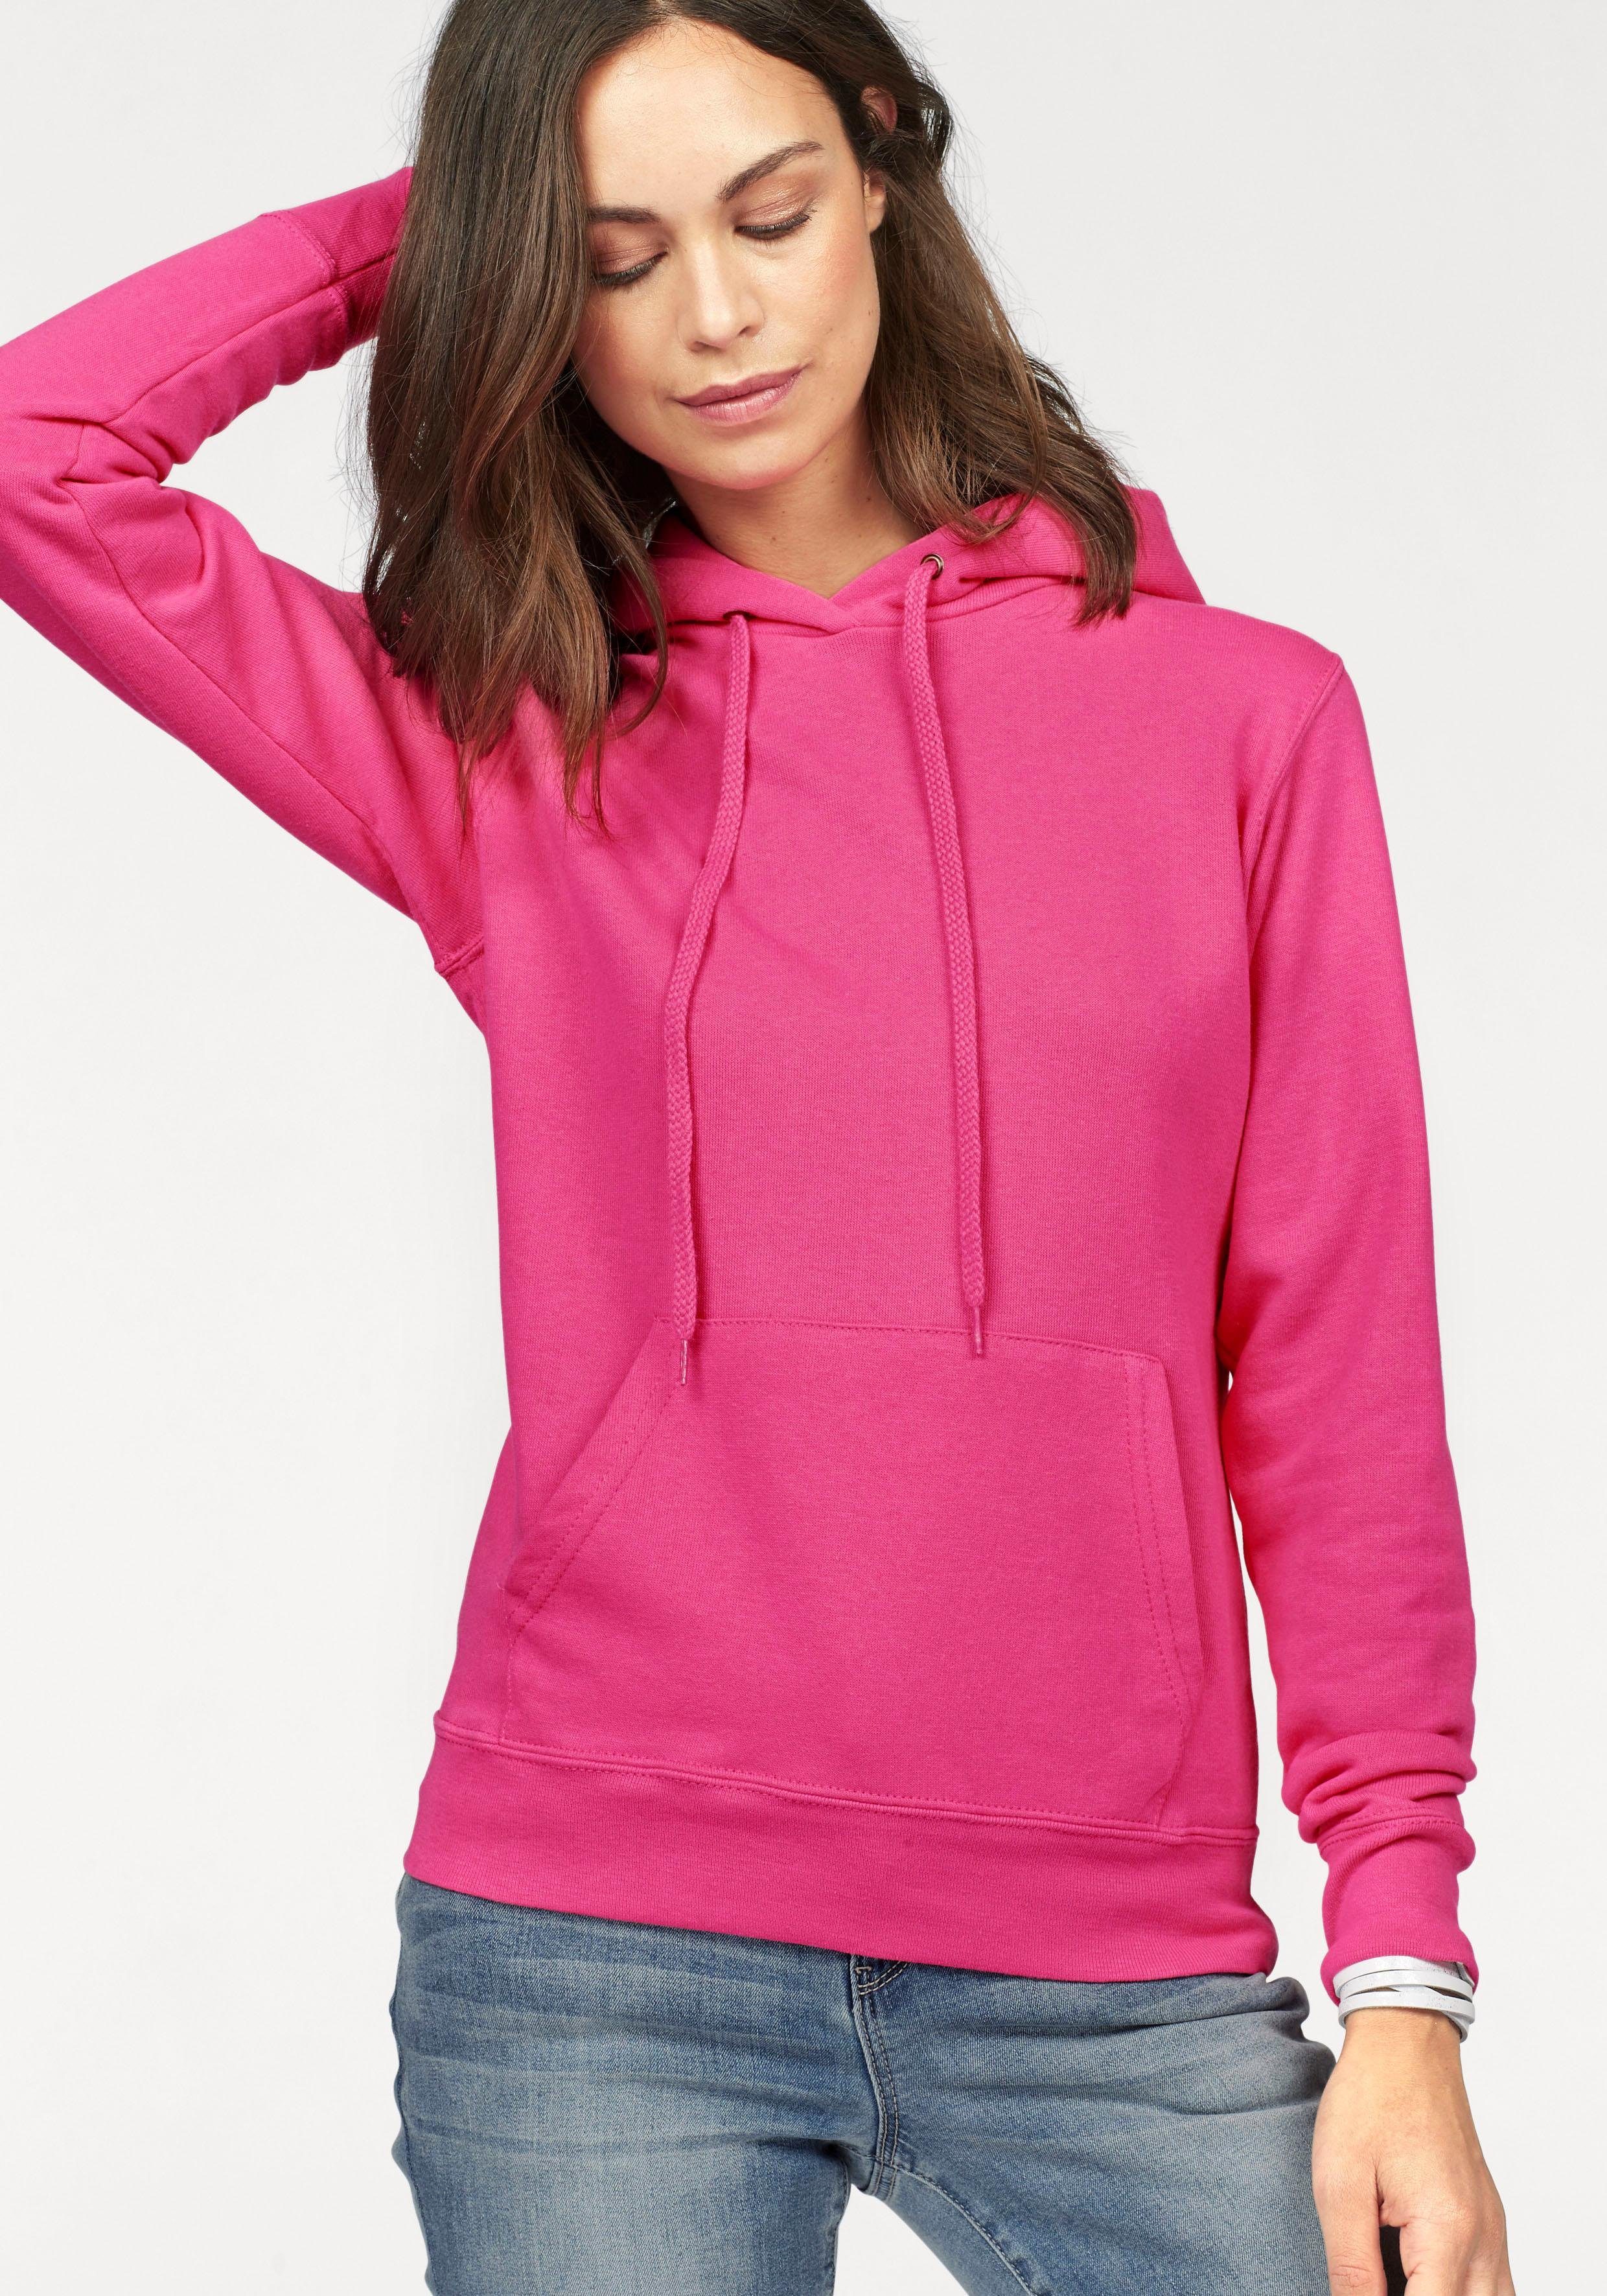 Fruit of the Loom Sweatshirt Classic hooded Sweat Lady-Fit pink